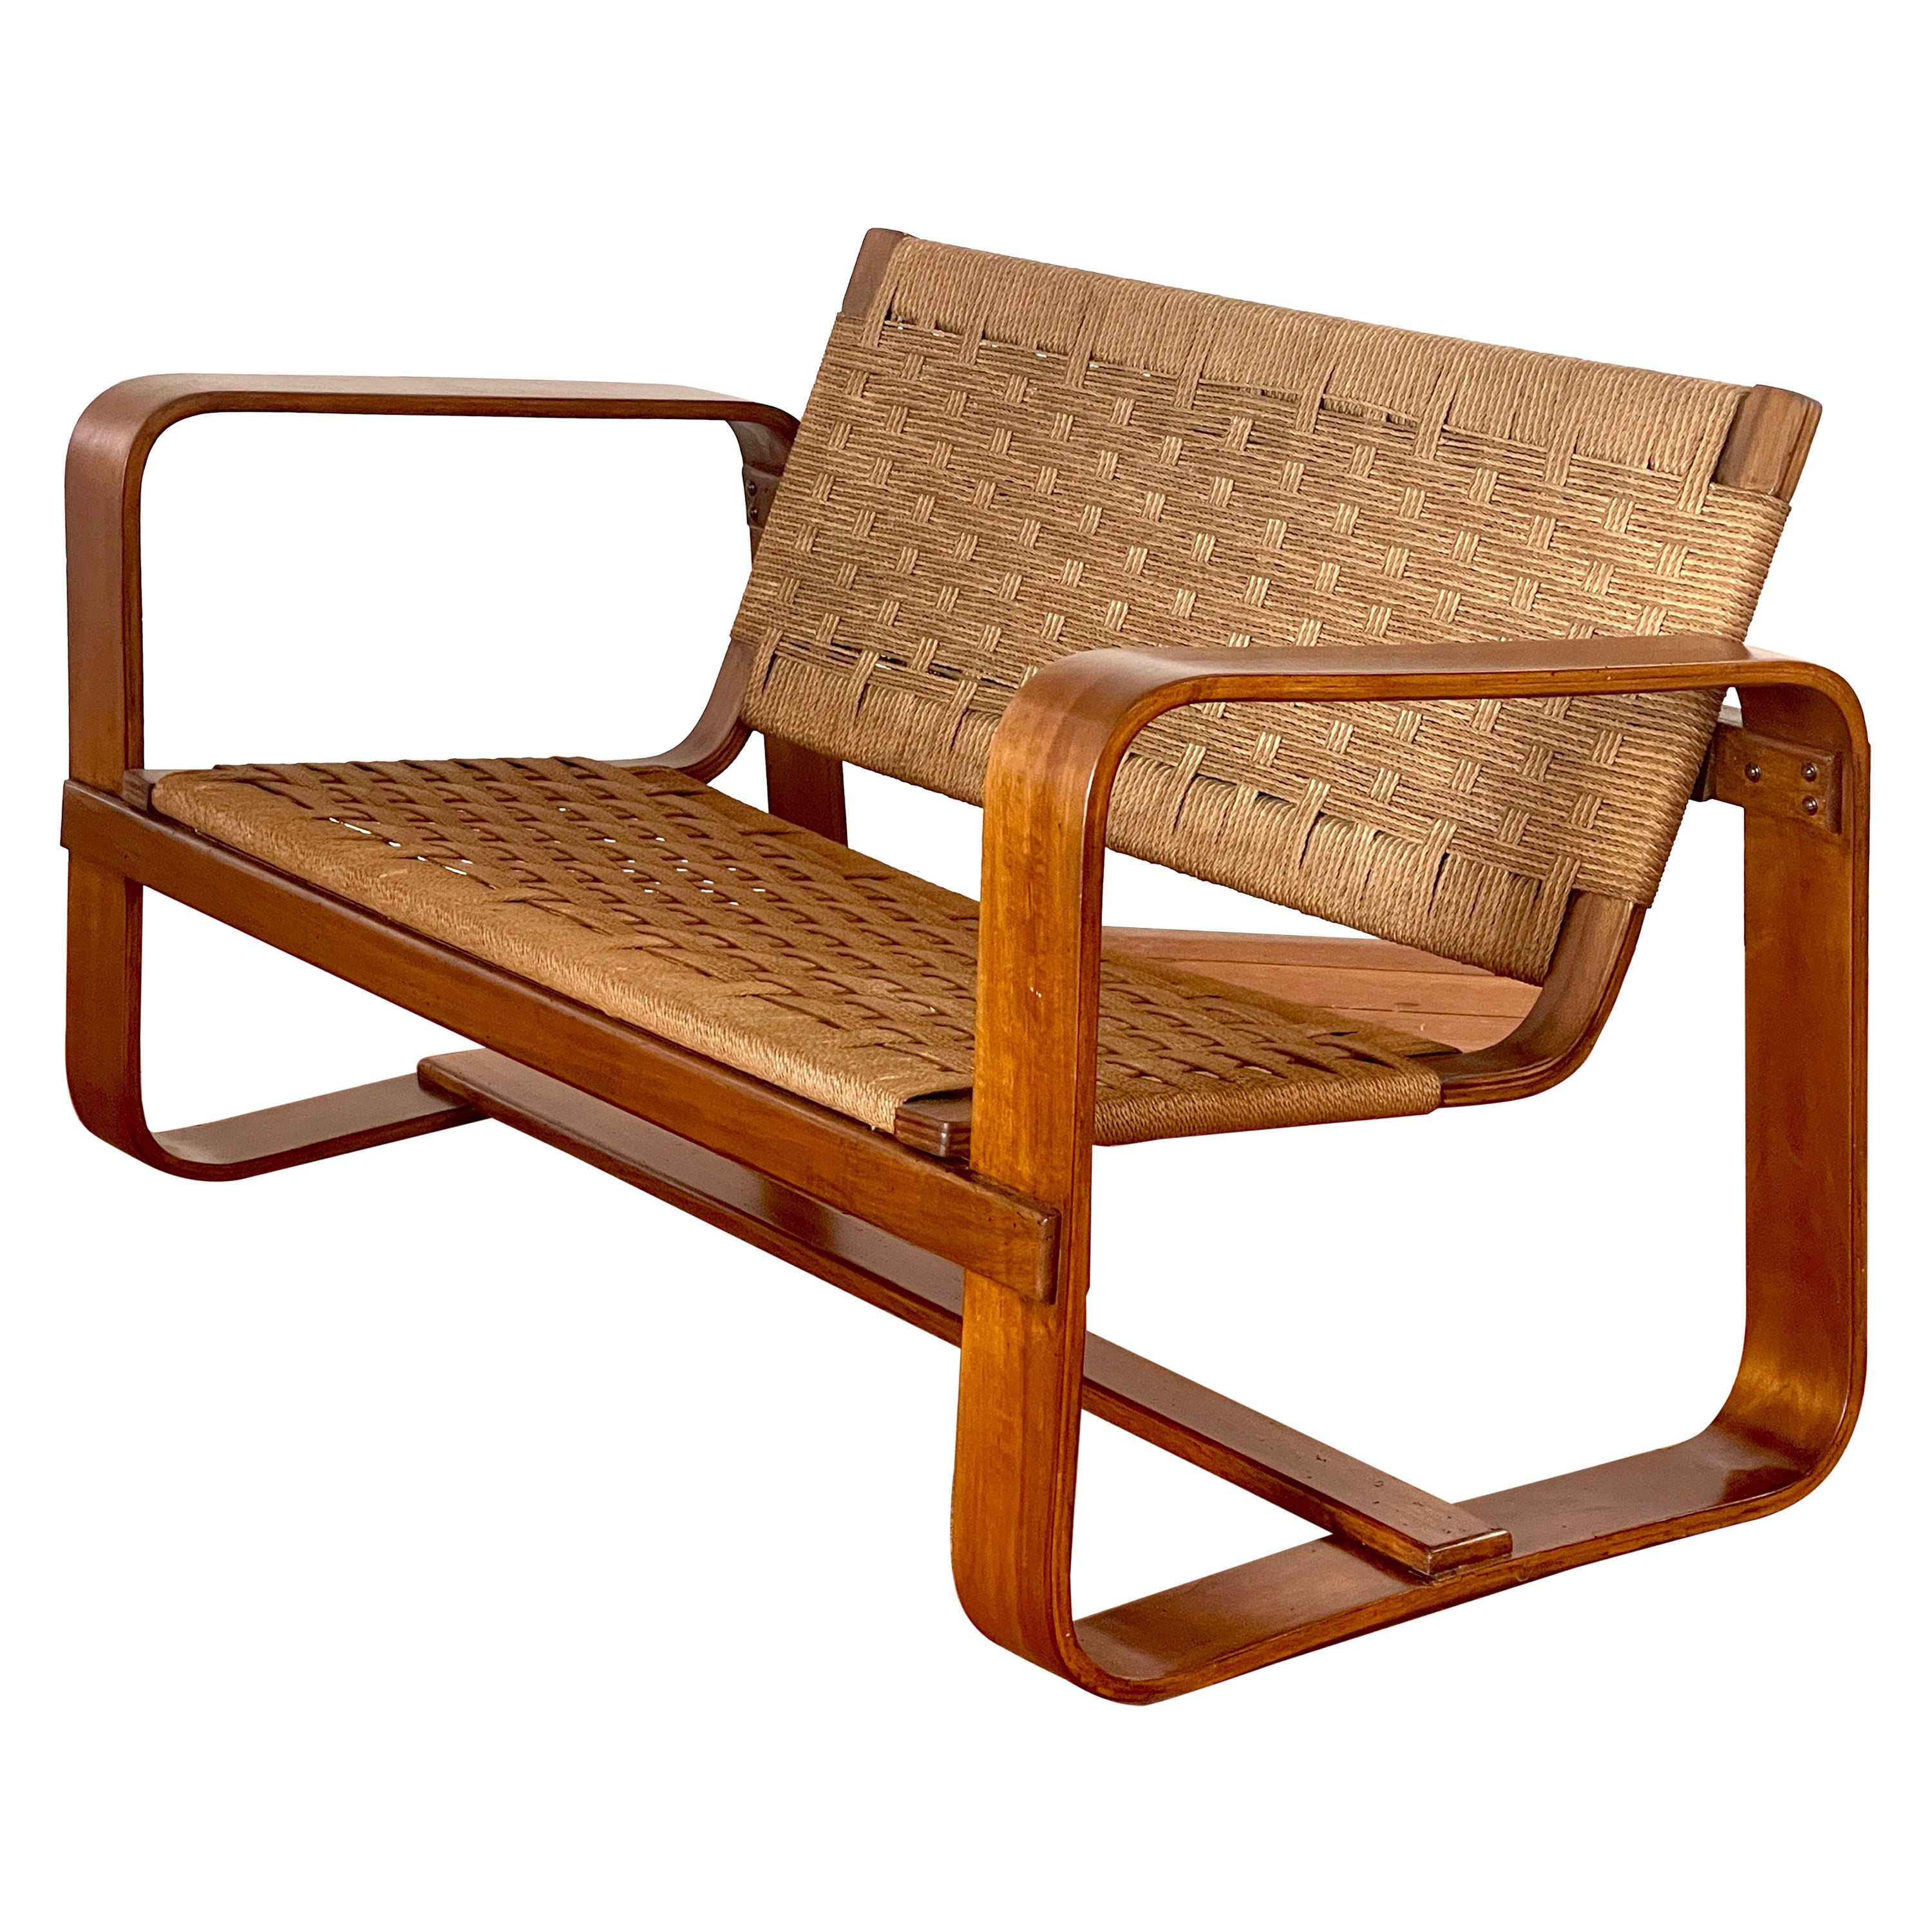 Guiseppe Pagano Pogatschnig Bench, 1939 For Sale